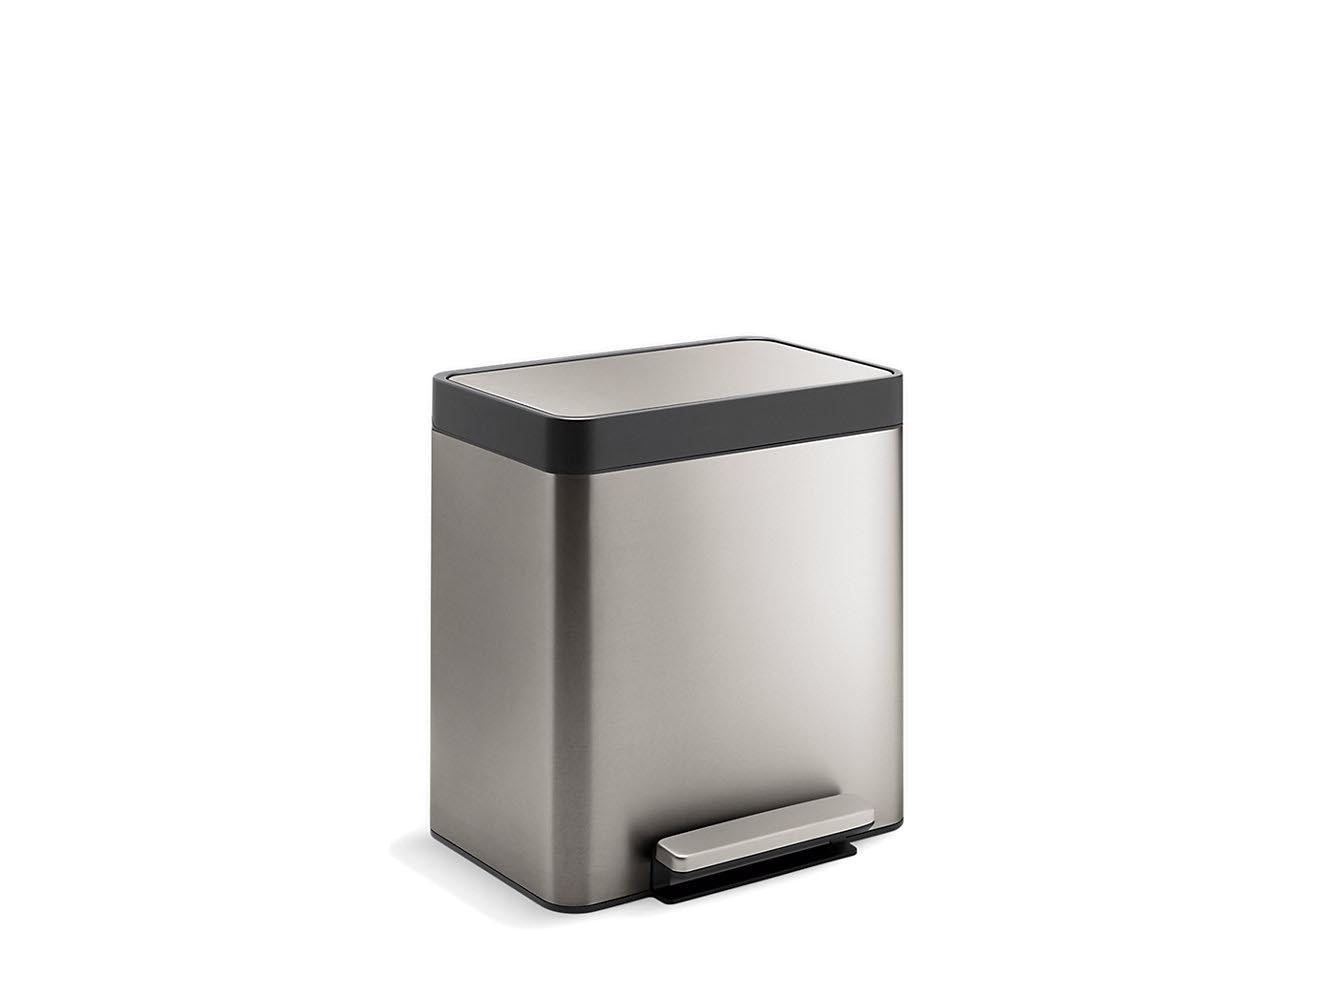 Kohler 8-Gallon Compact Step Can - Stainless Steel